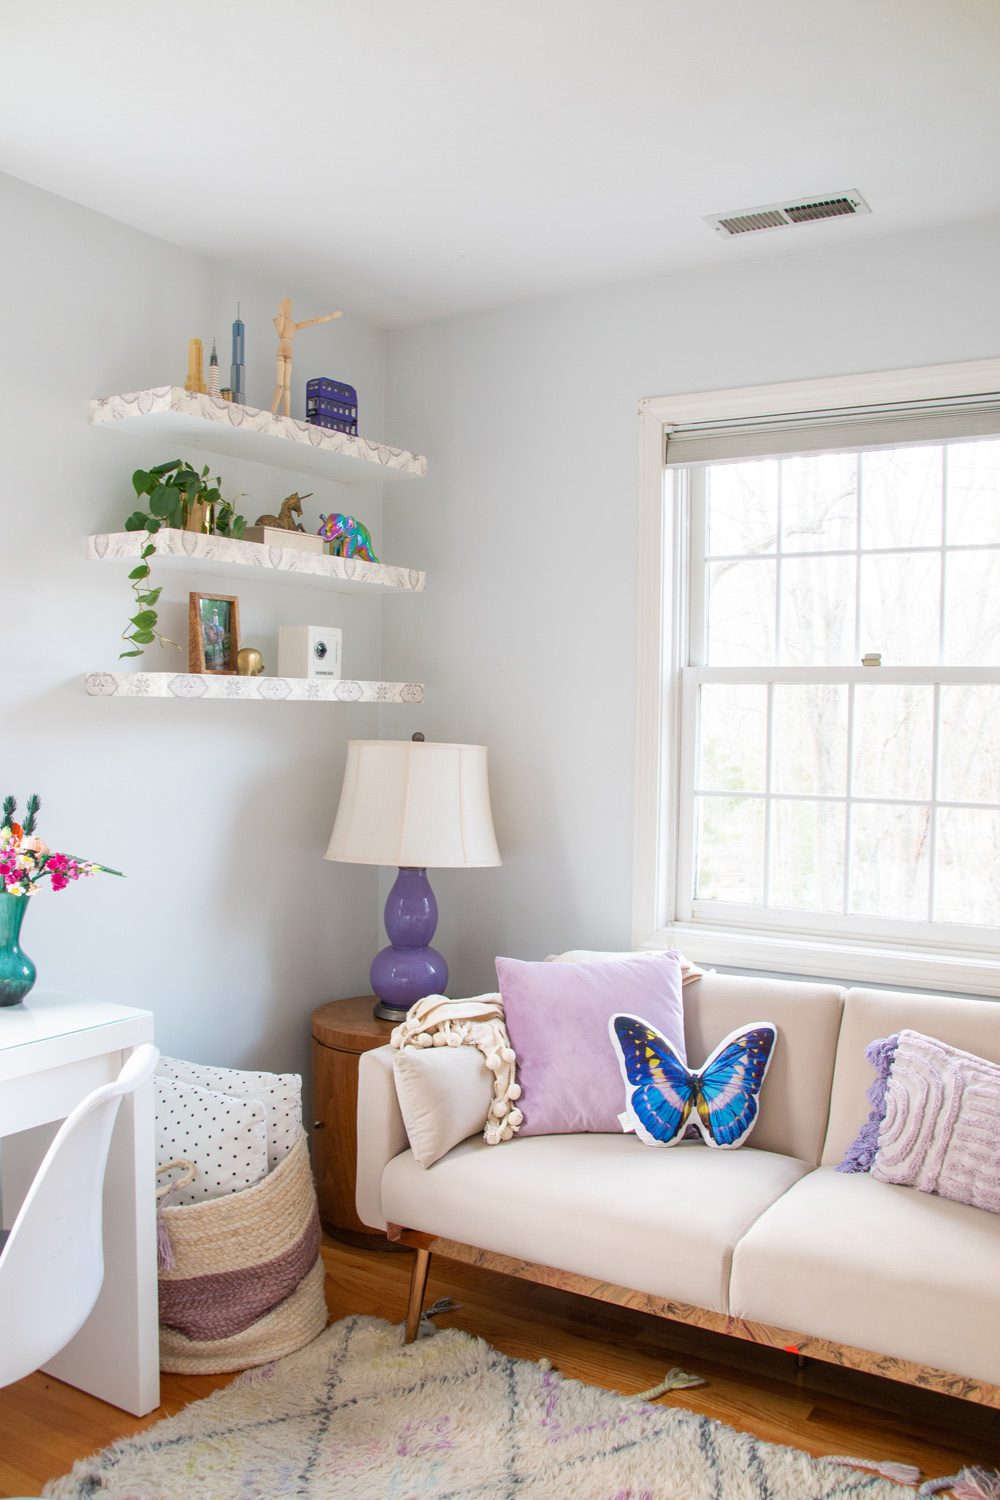 Corner of a kid's bedroom with three decorated floating shelves, basket, table with a purple lamp, and loveseat with throw pillows.